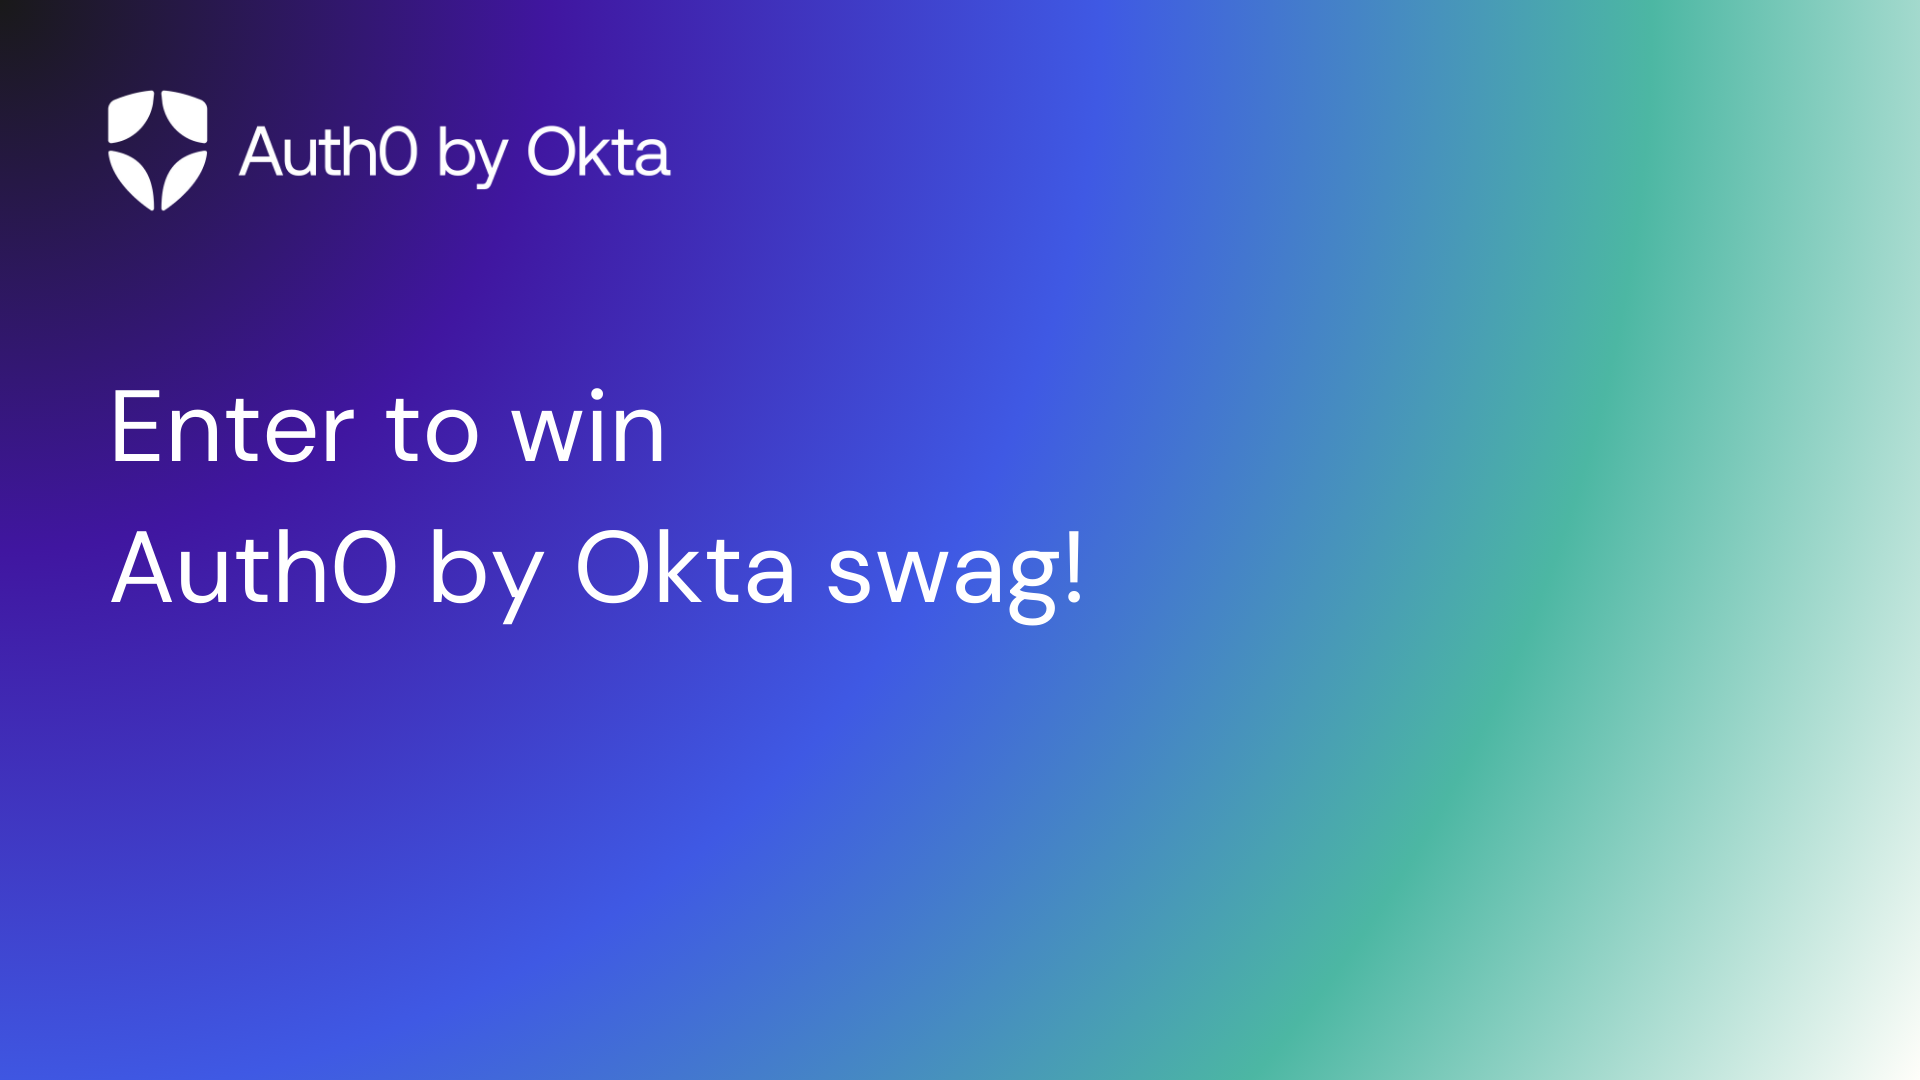 Enter to win an Auth0 by Okta swag bag